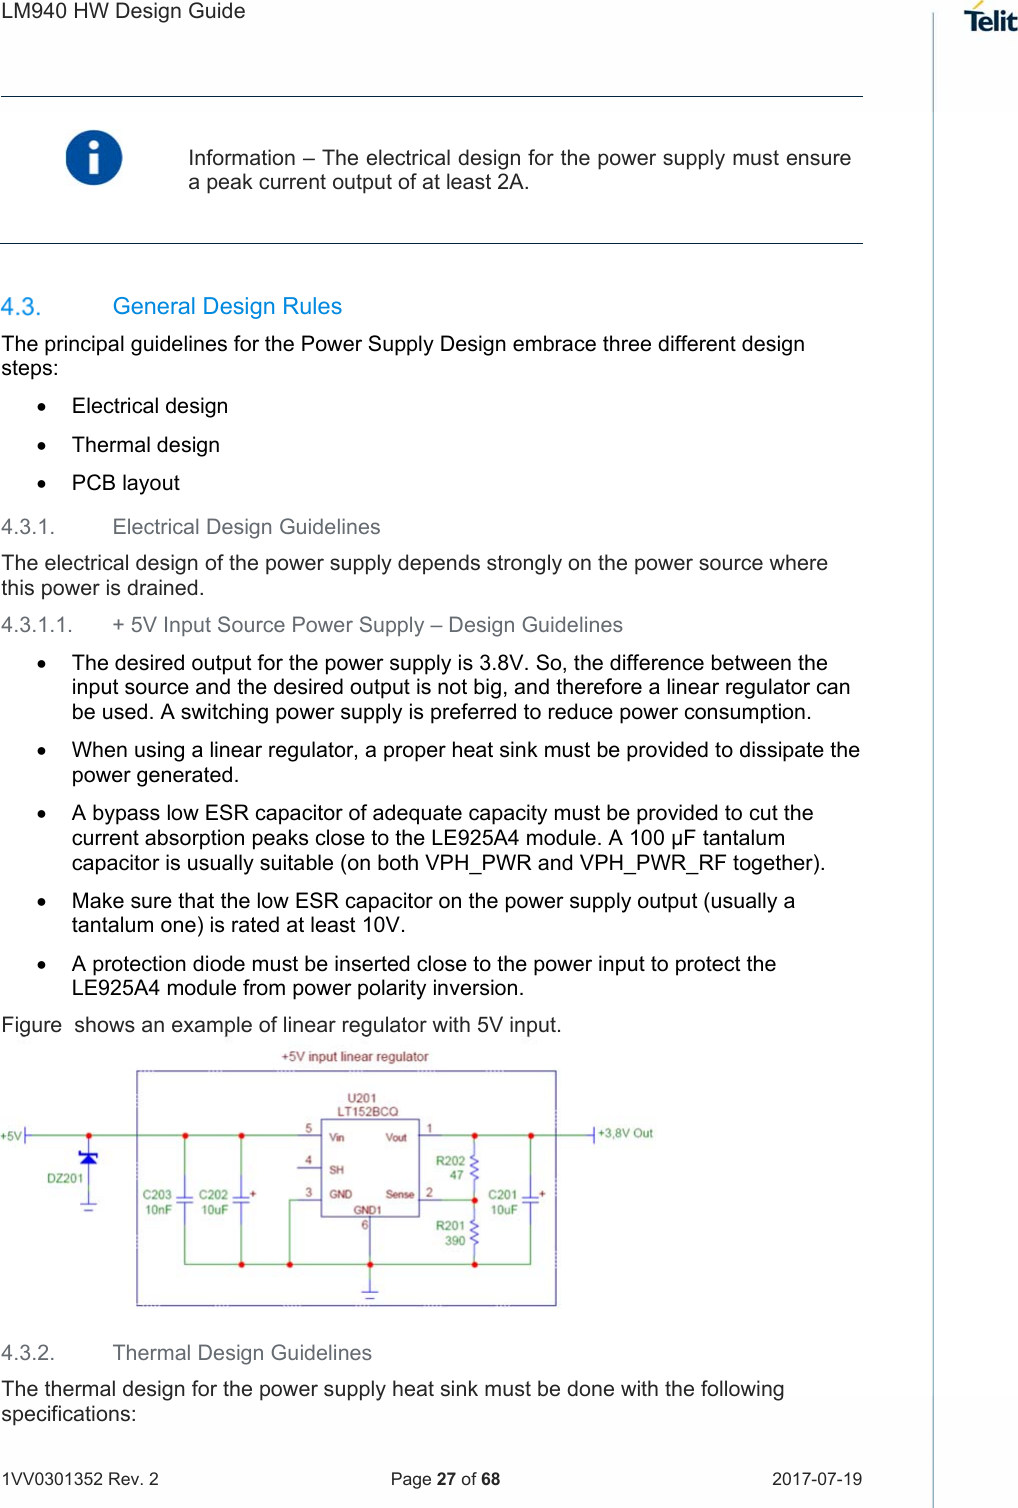 LM940 HW Design Guide   1VV0301352 Rev. 2   Page 27 of 68  2017-07-19    Information – The electrical design for the power supply must ensure a peak current output of at least 2A.     General Design Rules The principal guidelines for the Power Supply Design embrace three different design steps:   Electrical design   Thermal design   PCB layout 4.3.1.  Electrical Design Guidelines The electrical design of the power supply depends strongly on the power source where this power is drained.  4.3.1.1.  + 5V Input Source Power Supply – Design Guidelines   The desired output for the power supply is 3.8V. So, the difference between the input source and the desired output is not big, and therefore a linear regulator can be used. A switching power supply is preferred to reduce power consumption.  When using a linear regulator, a proper heat sink must be provided to dissipate the power generated.  A bypass low ESR capacitor of adequate capacity must be provided to cut the current absorption peaks close to the LE925A4 module. A 100 μF tantalum capacitor is usually suitable (on both VPH_PWR and VPH_PWR_RF together).  Make sure that the low ESR capacitor on the power supply output (usually a tantalum one) is rated at least 10V.  A protection diode must be inserted close to the power input to protect the LE925A4 module from power polarity inversion.Figure  shows an example of linear regulator with 5V input.      4.3.2.  Thermal Design Guidelines The thermal design for the power supply heat sink must be done with the following specifications: 